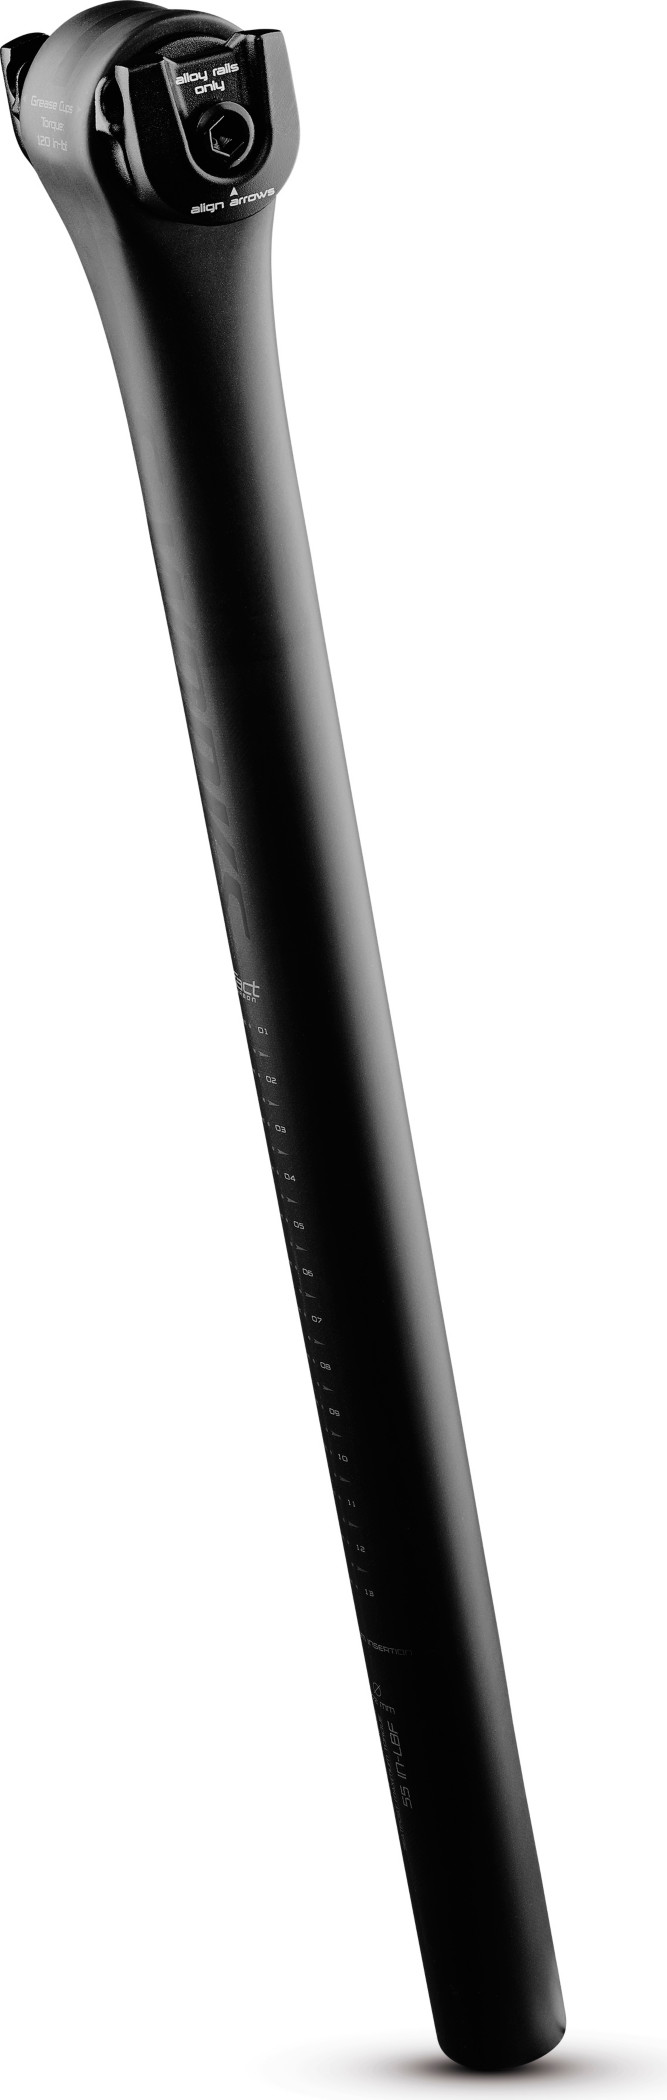 Specialized S-Works Sl7 Carbon Seatpost - Seat Post - Parts | Dave ...